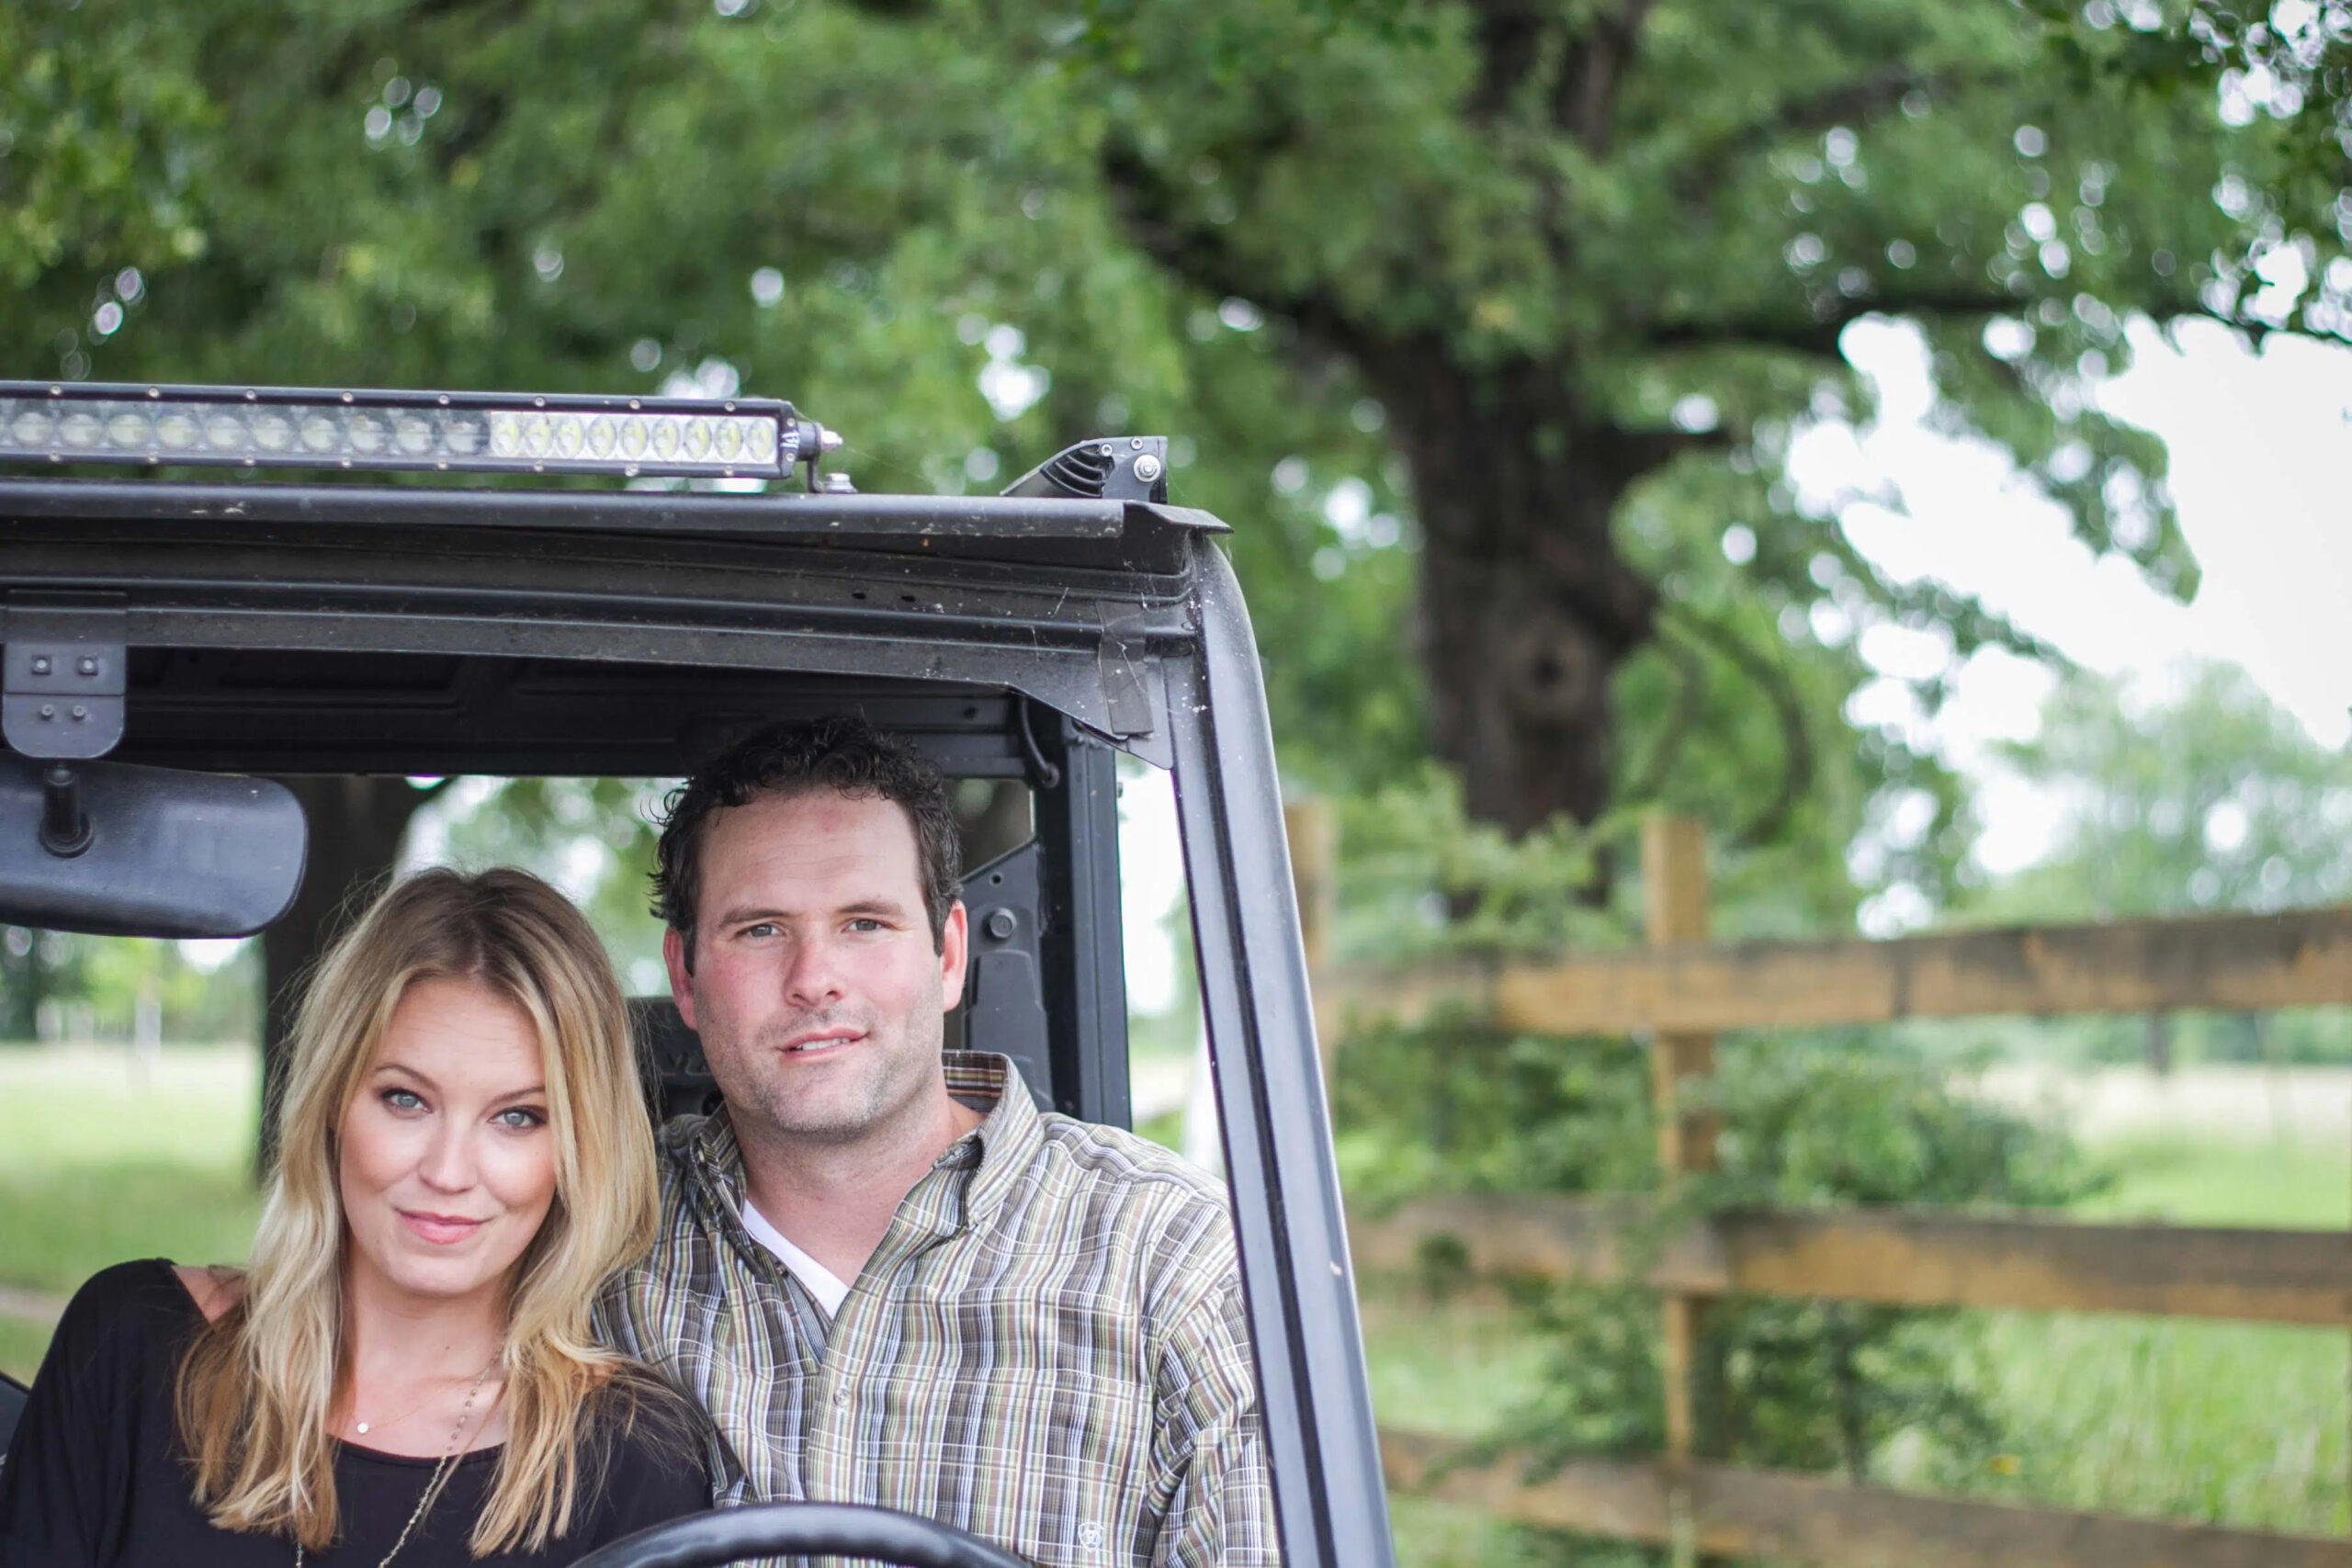 Man and woman pose outdoors inside of a vehicle